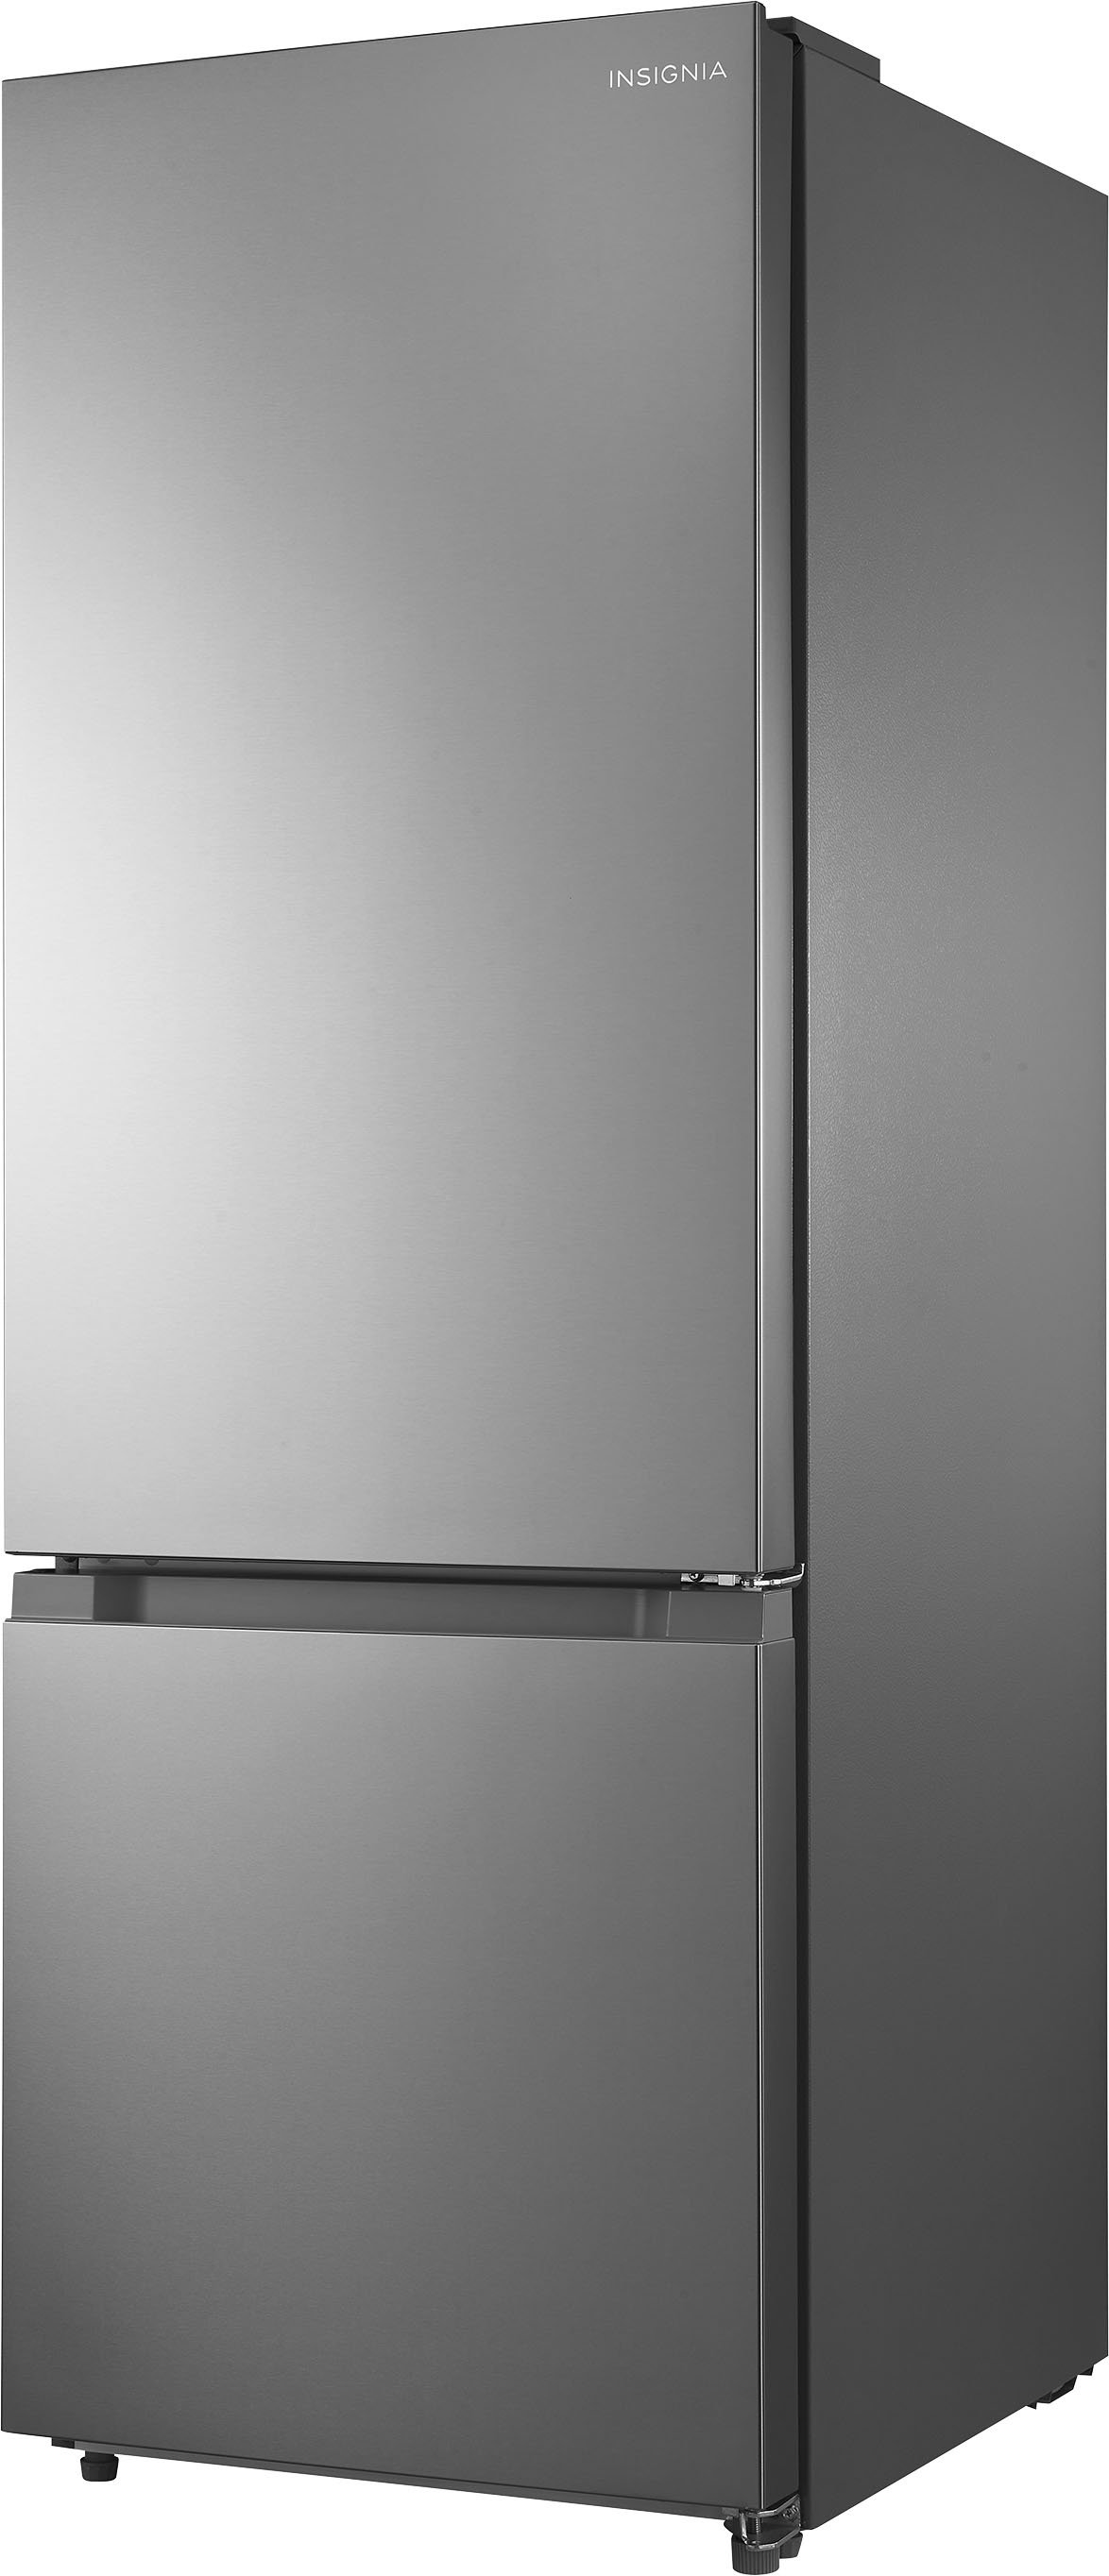 Left View: Insignia™ - 11.5 Cu. Ft. Bottom Mount Refrigerator - Stainless steel